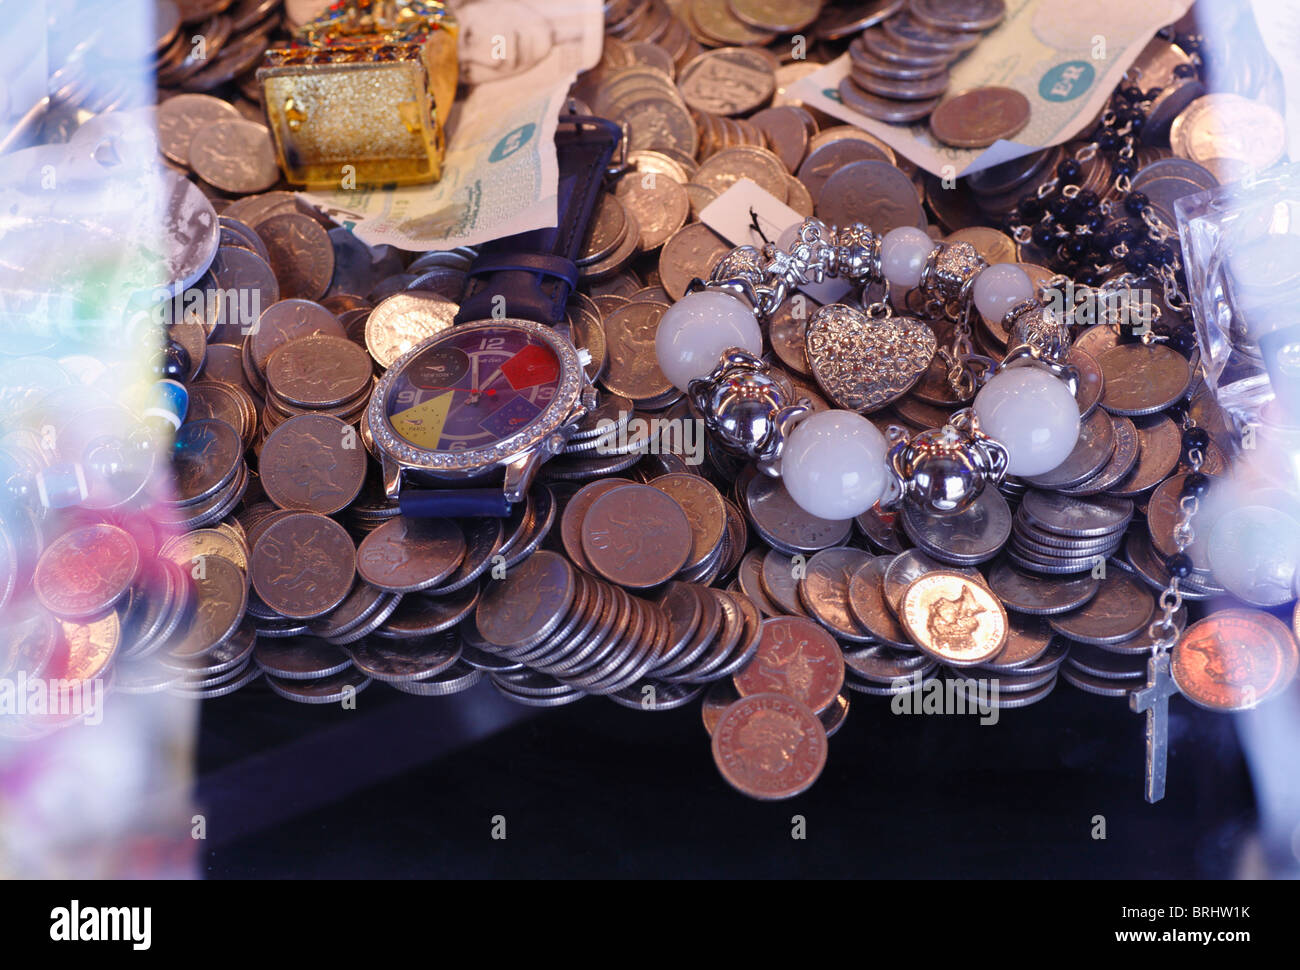 Trinkets and coins in a penny falls at the funfair. Stock Photo